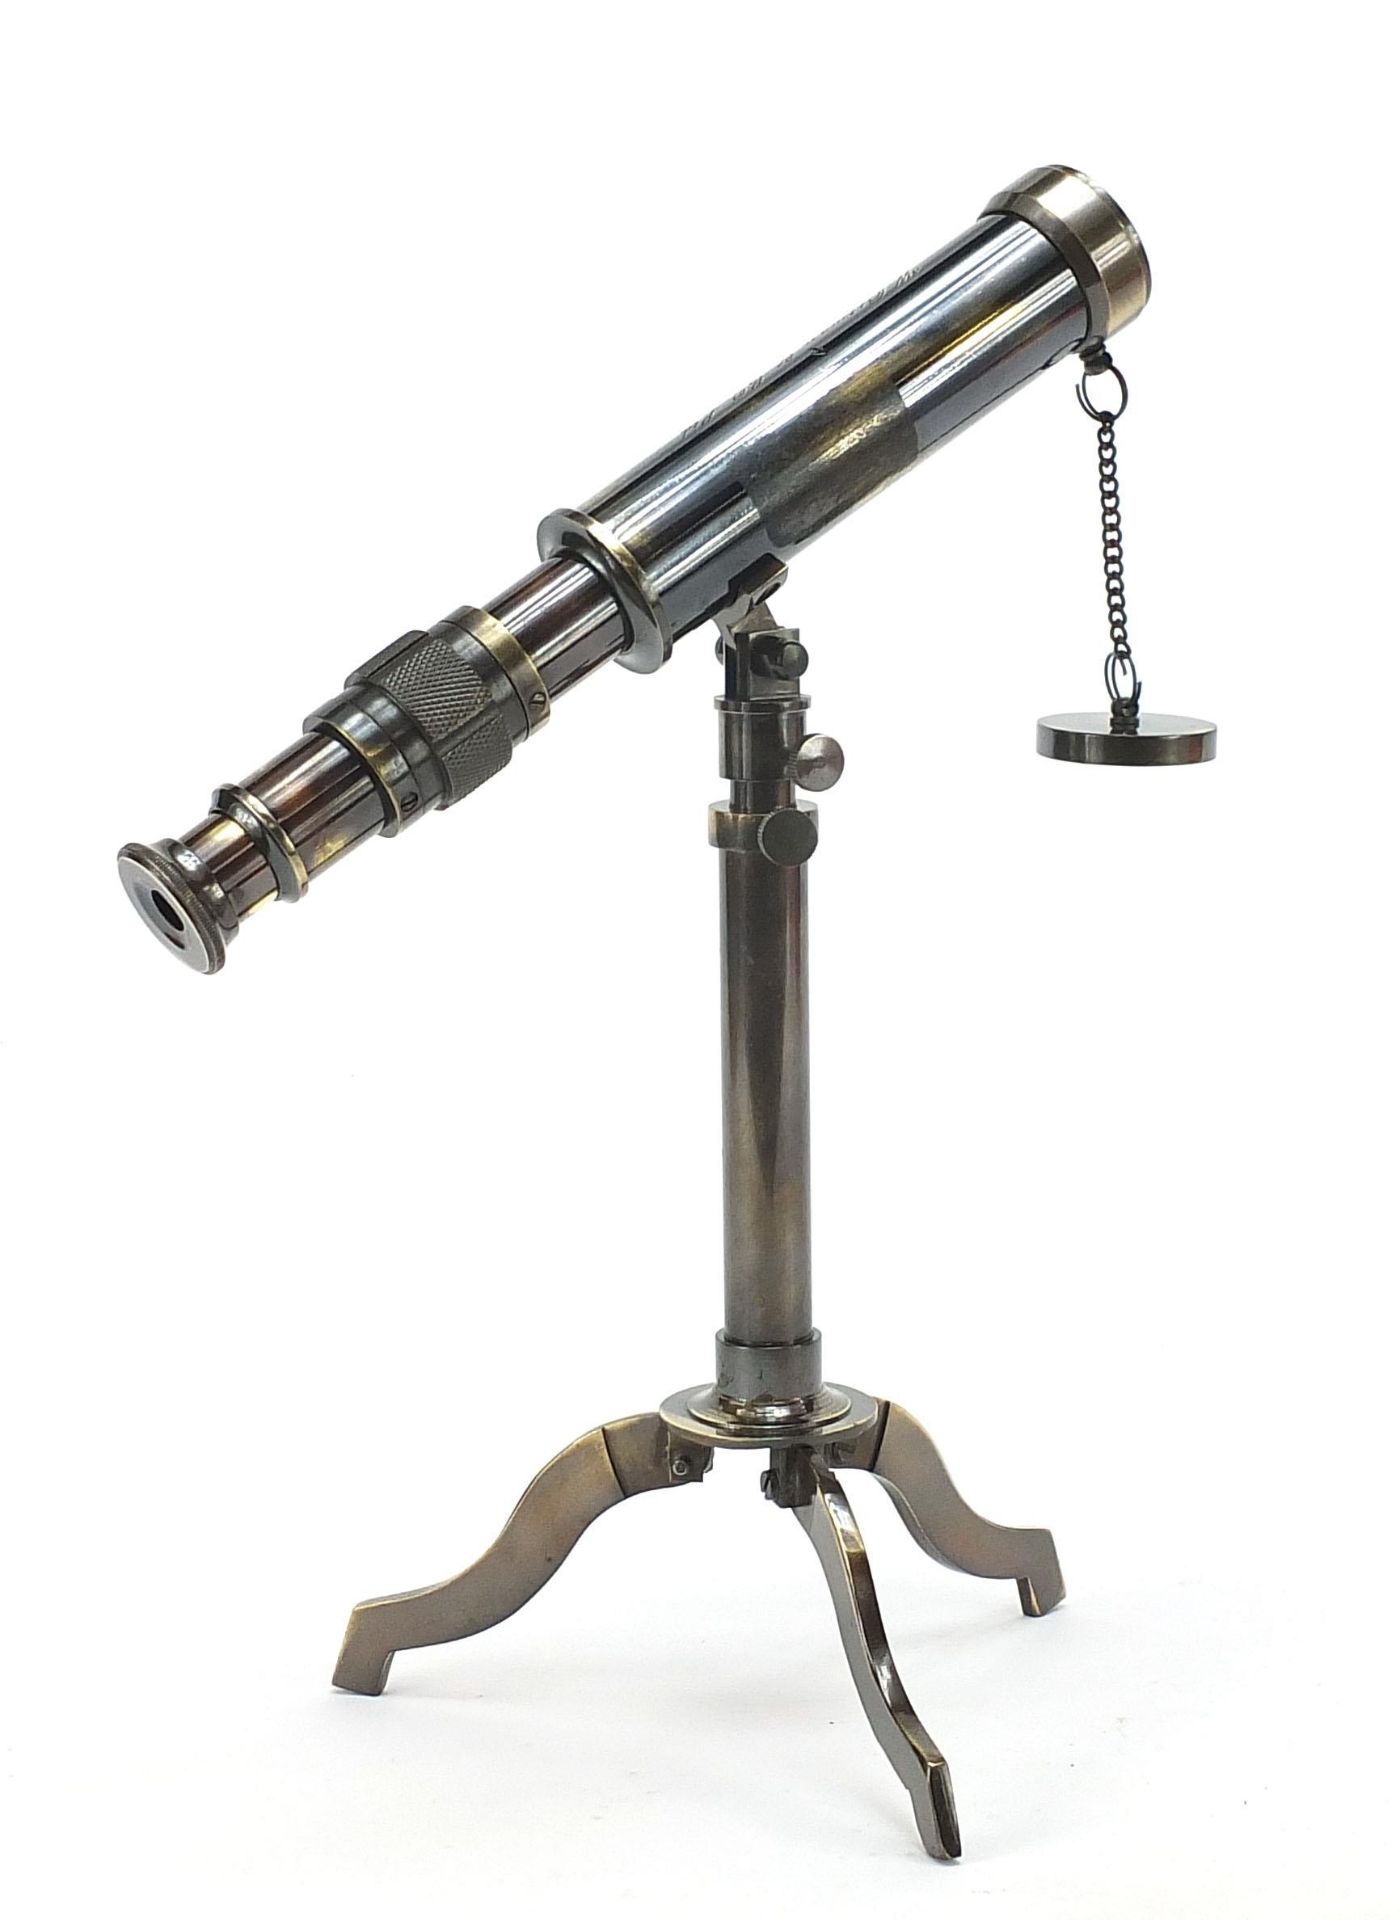 Military interest table telescope with tripod stand, 27cm high - Image 2 of 4